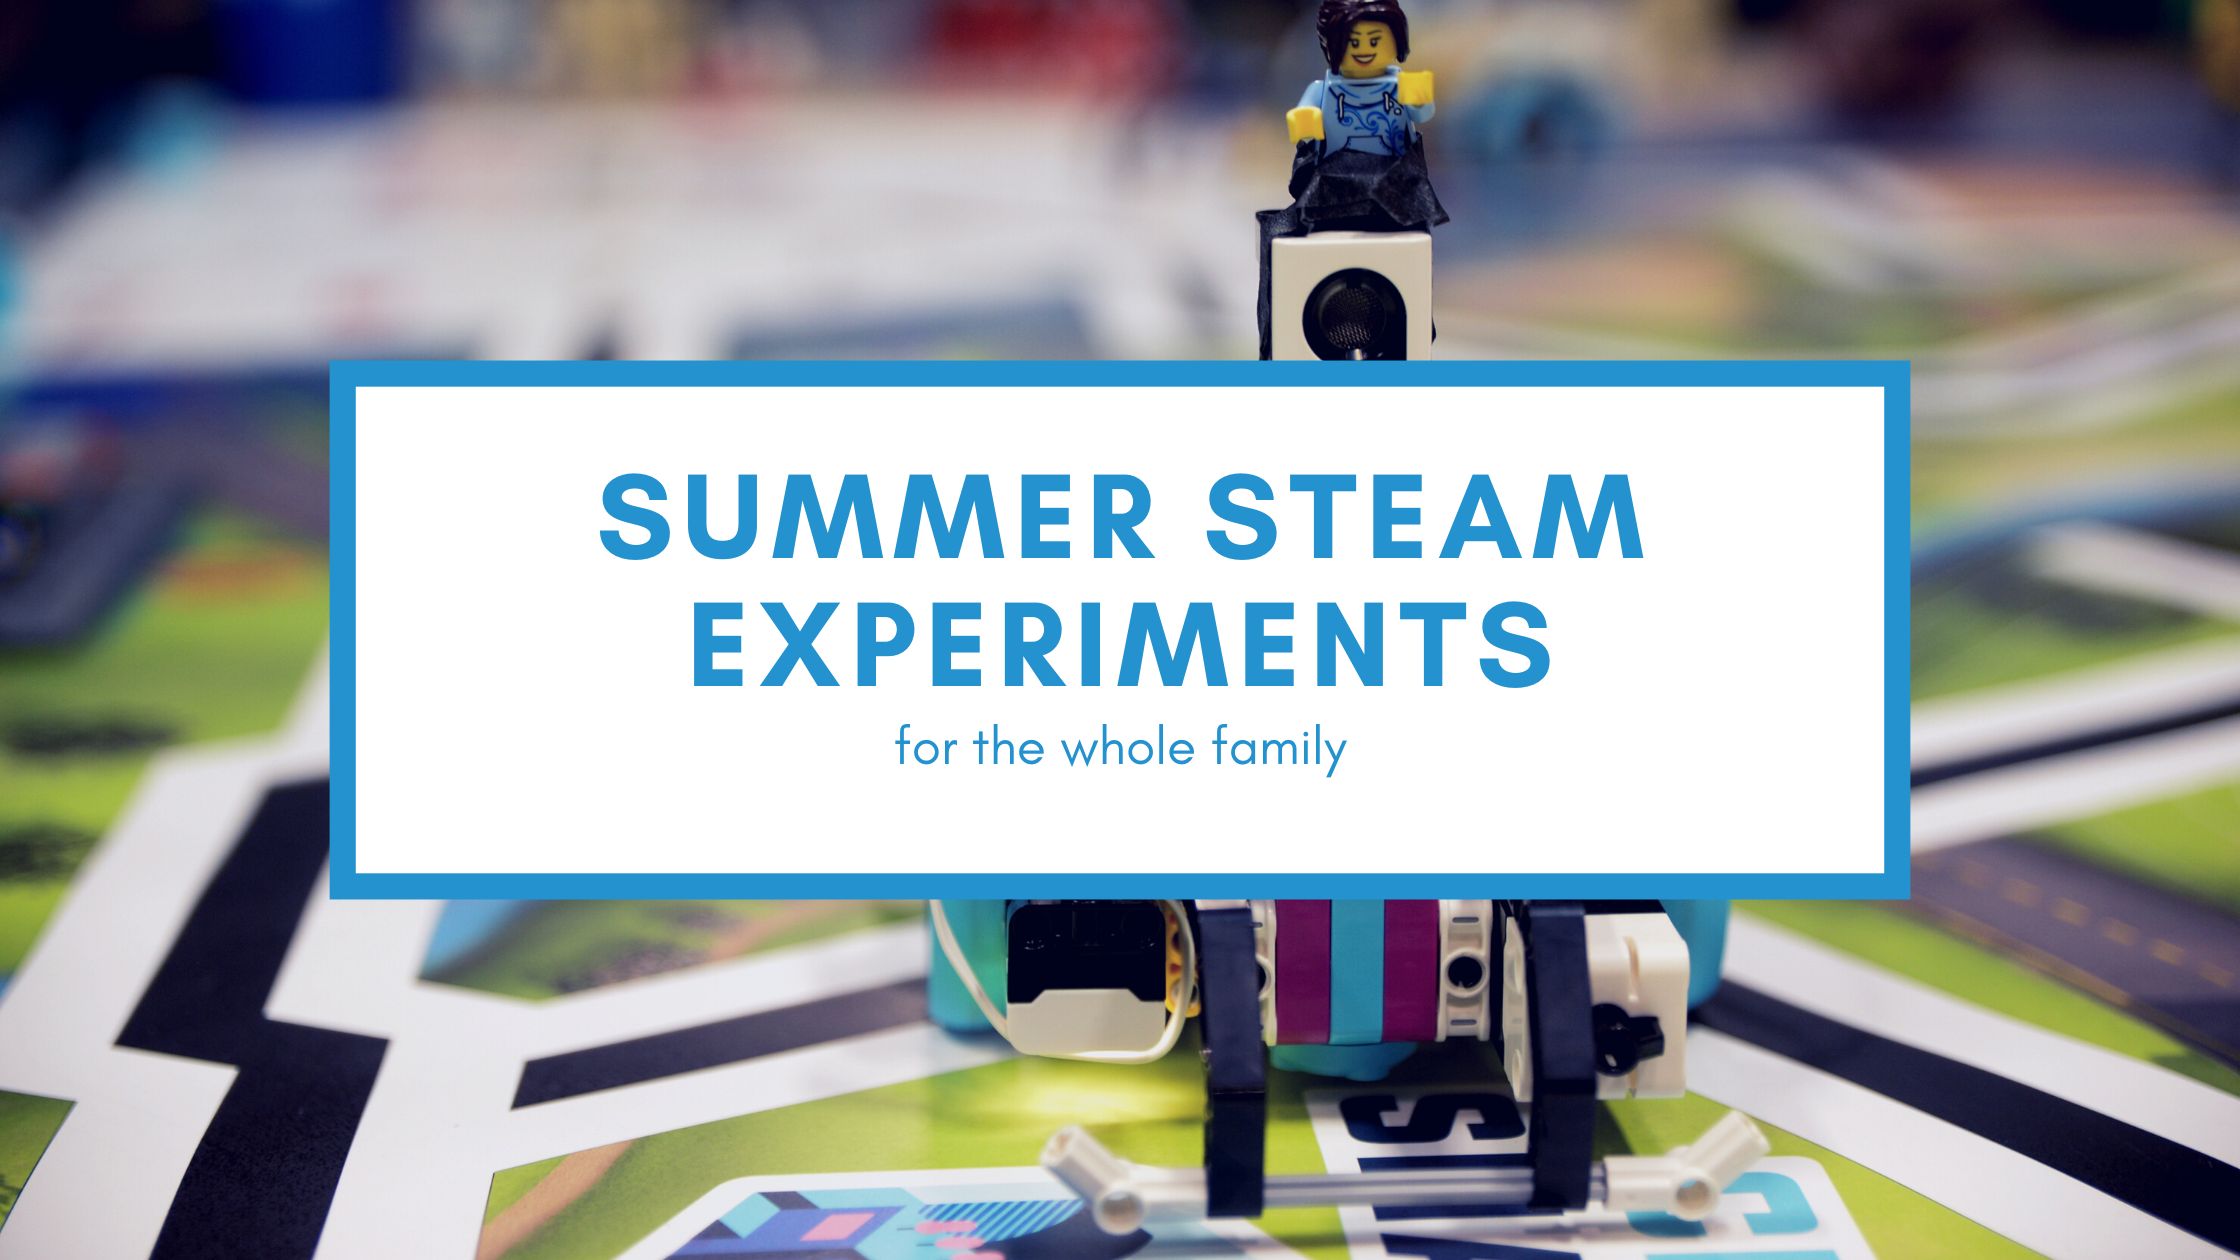 Summer STEAM experiments